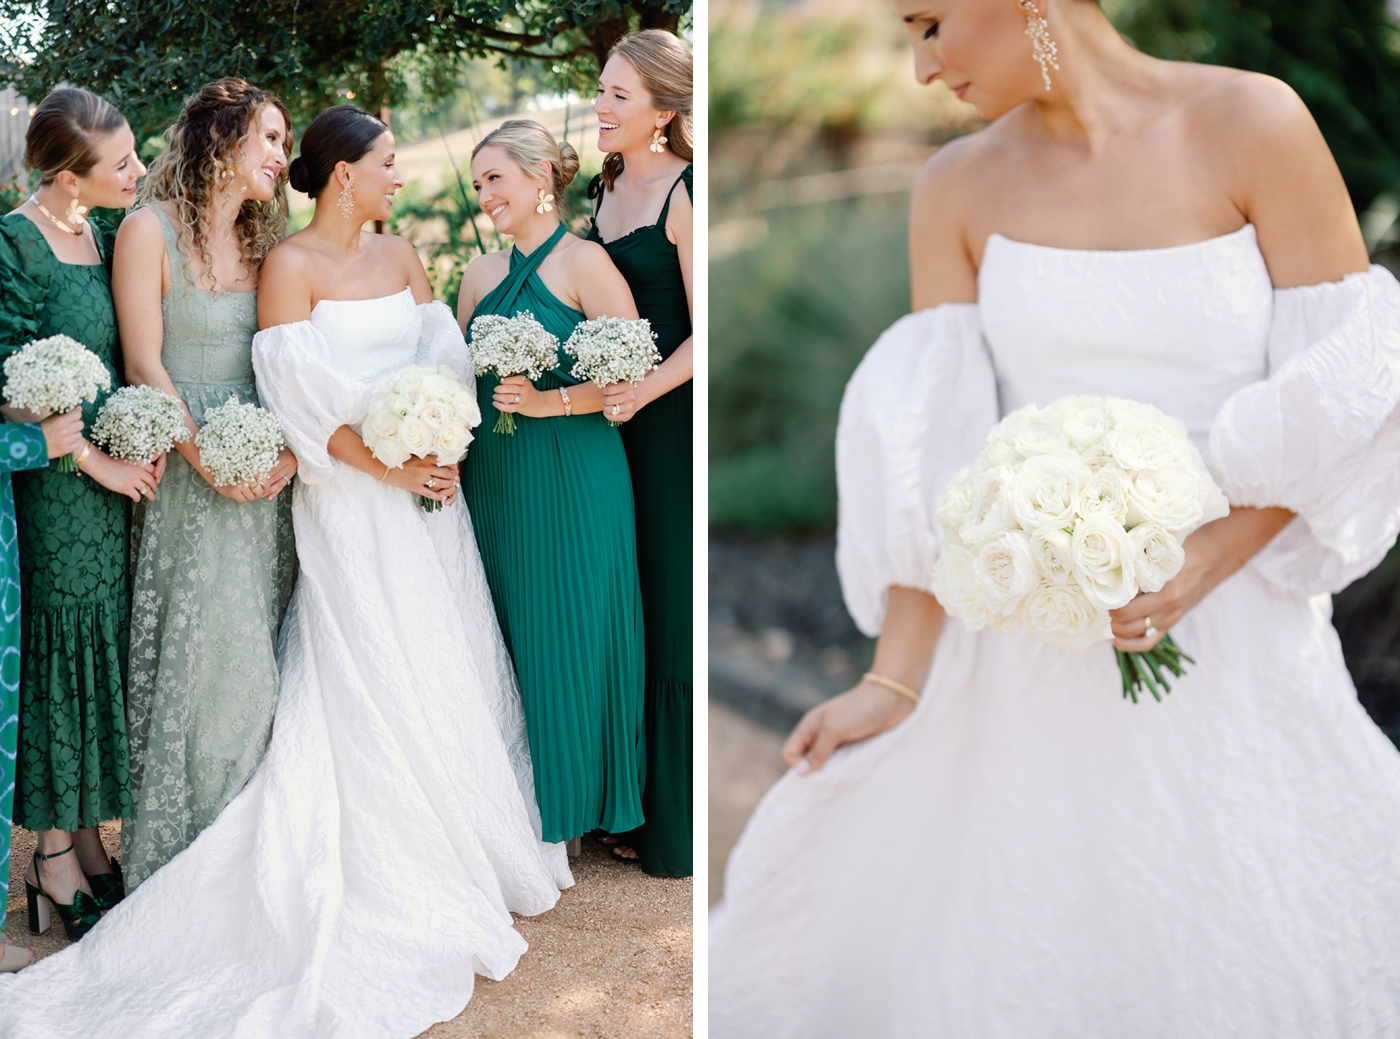 Bride next to her bridesmaids who are wearing dark green and light green dresses